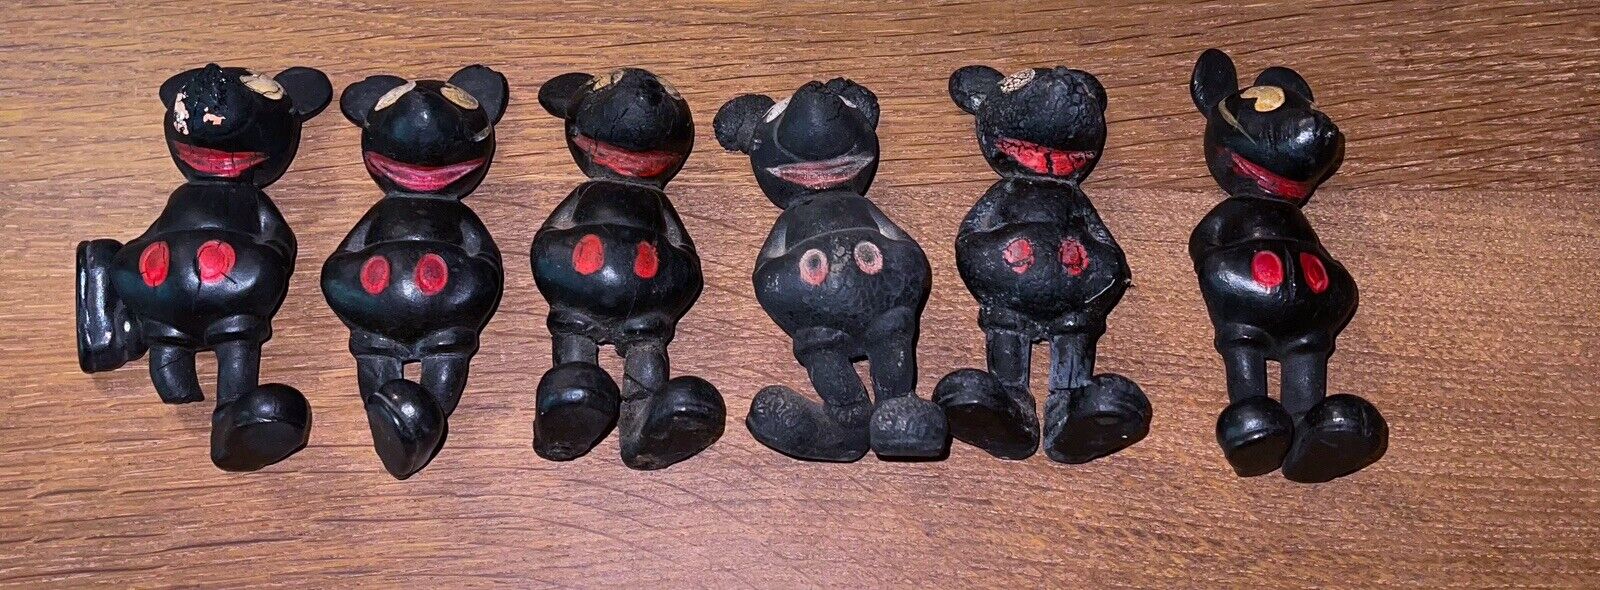 1930's Seiberling Rubber Mickey Mouse Pie-eyed Figures Disney Toy Various Cond.